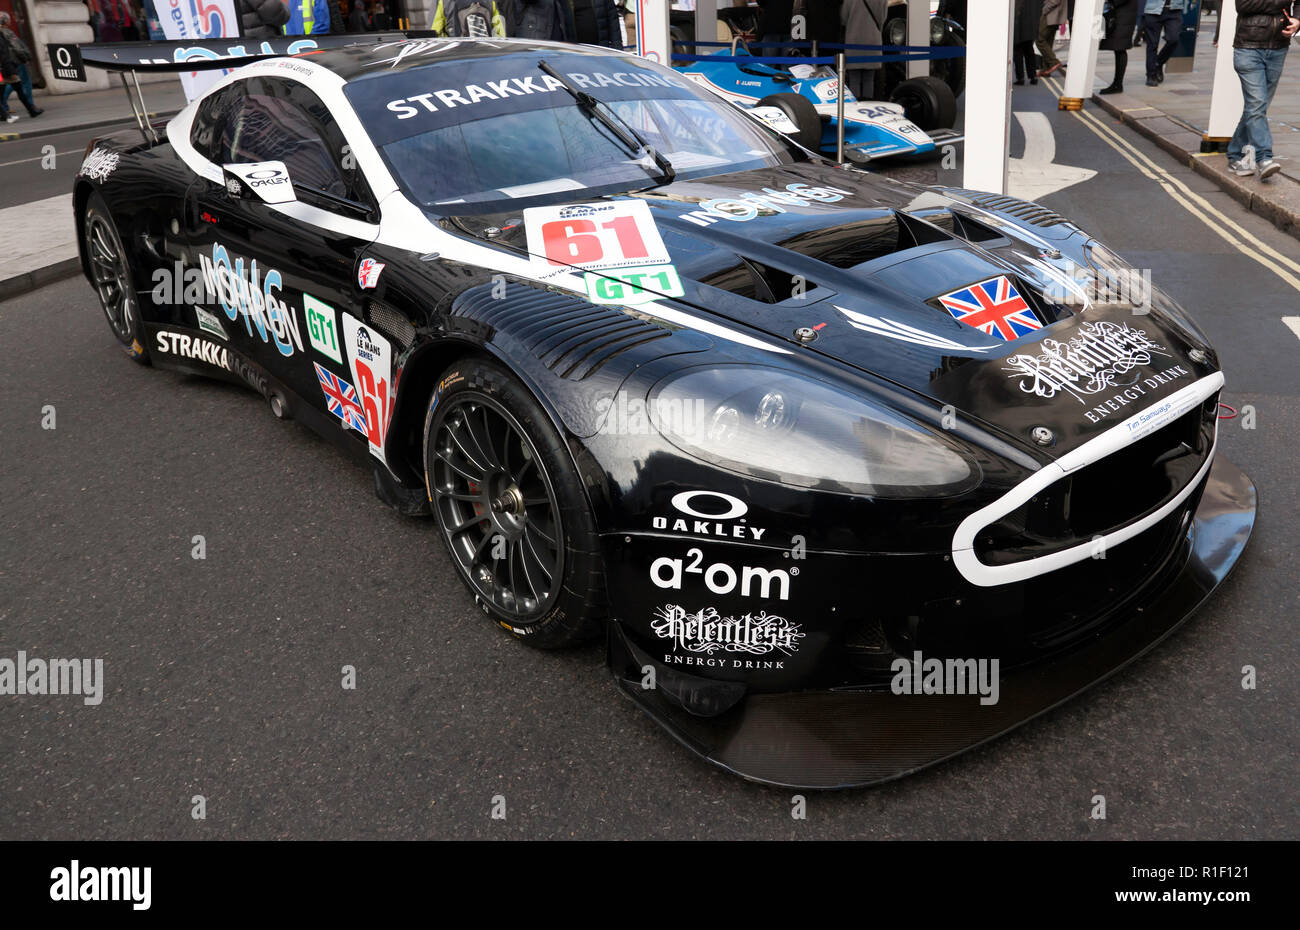 Three-quarter front view of an 2005, Aston Martin  DBR9 / 04,  racing car on display at the Regents Street Motor Show 2018 Stock Photo